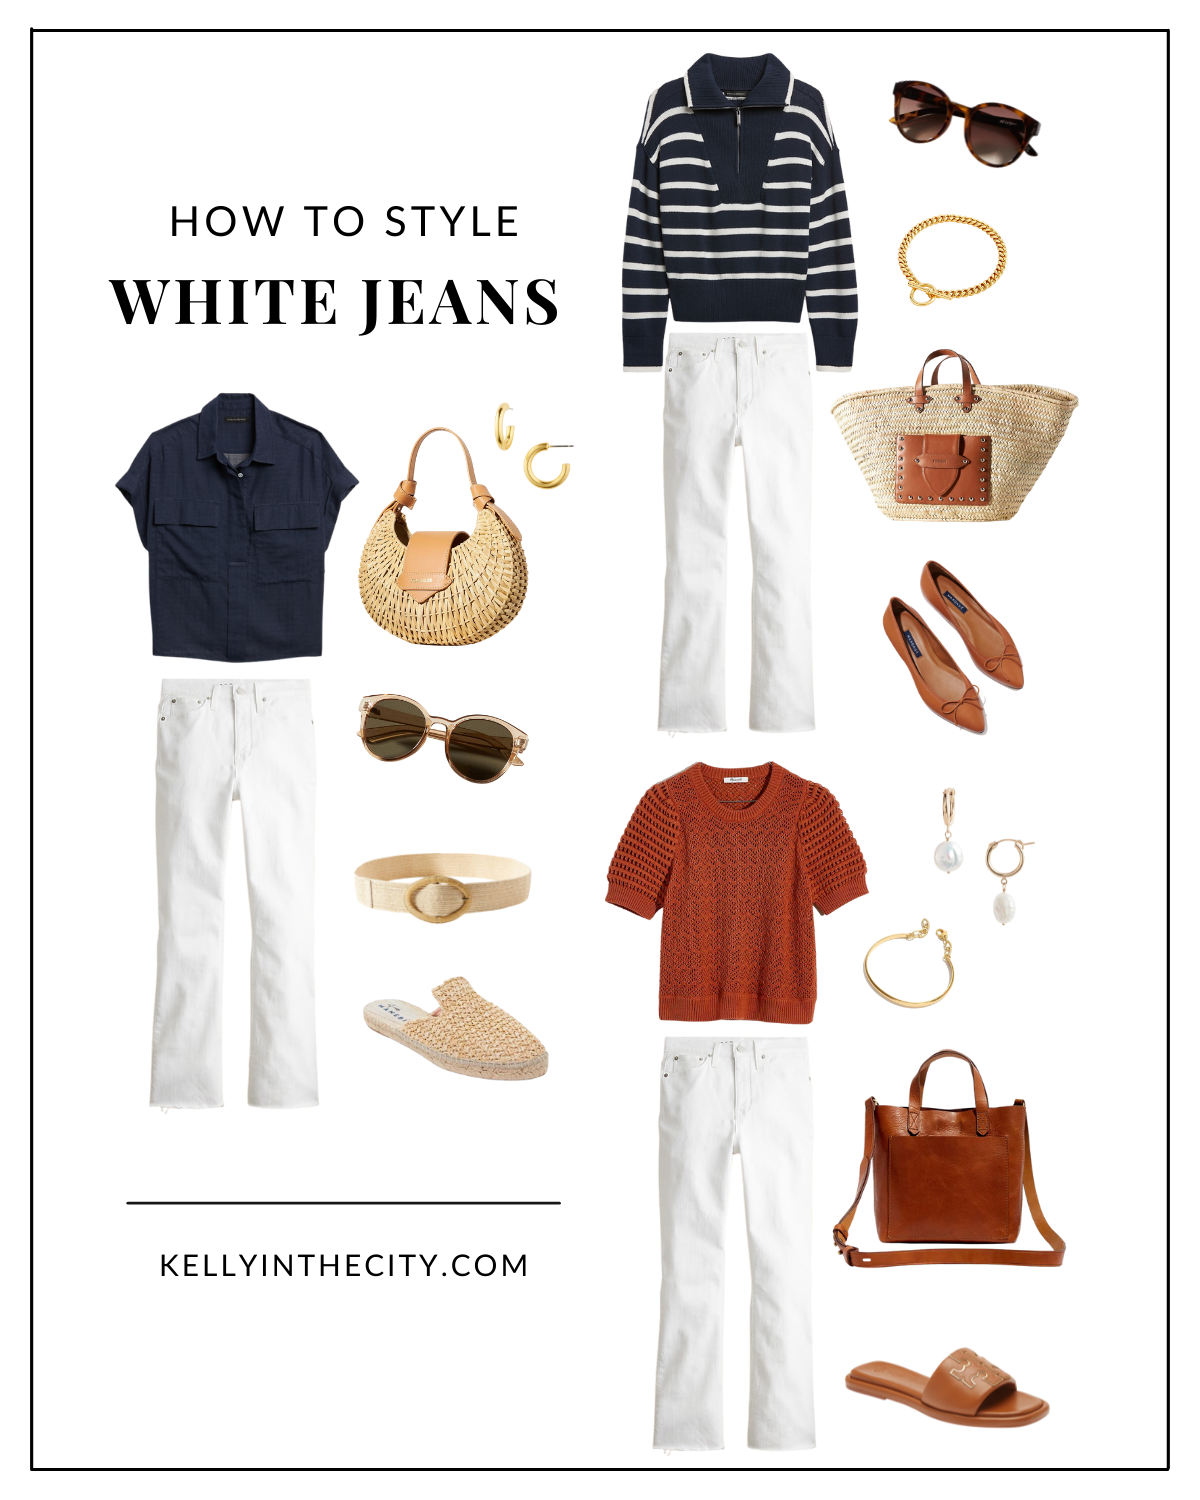 How to Style White Jeans 3 Ways | Kelly in the City